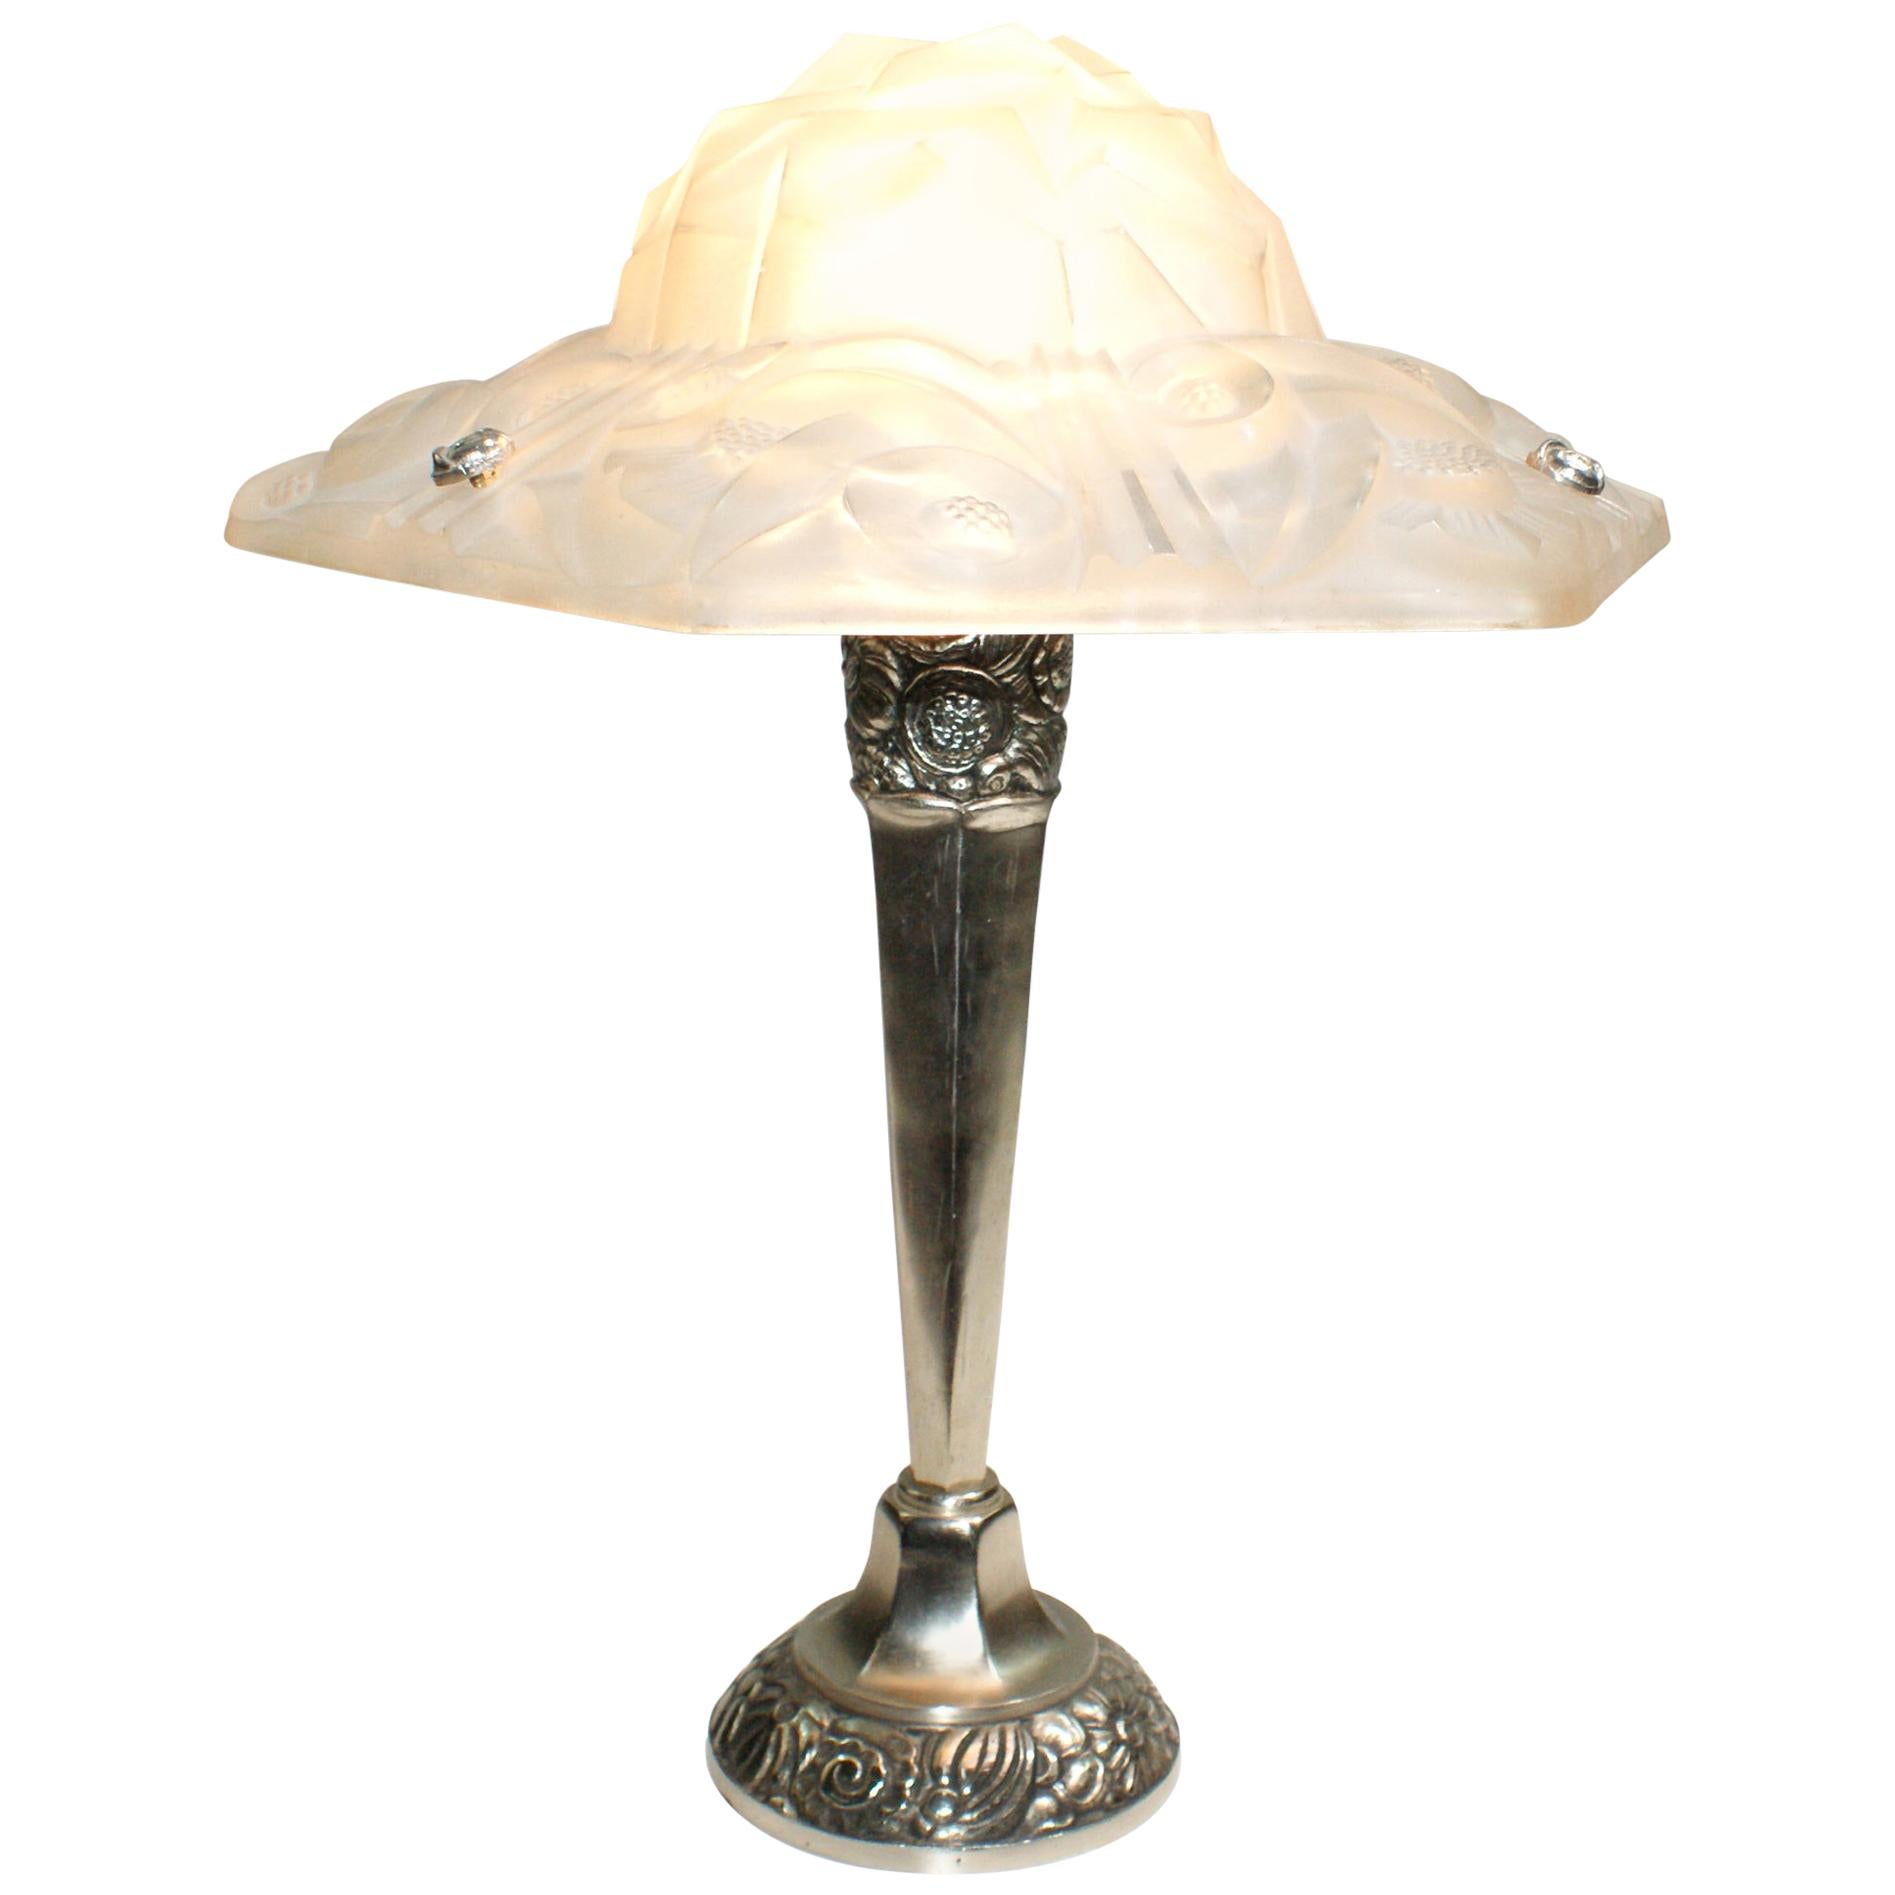 French Art Deco Floral Table Lamp Signed “Degue” For Sale